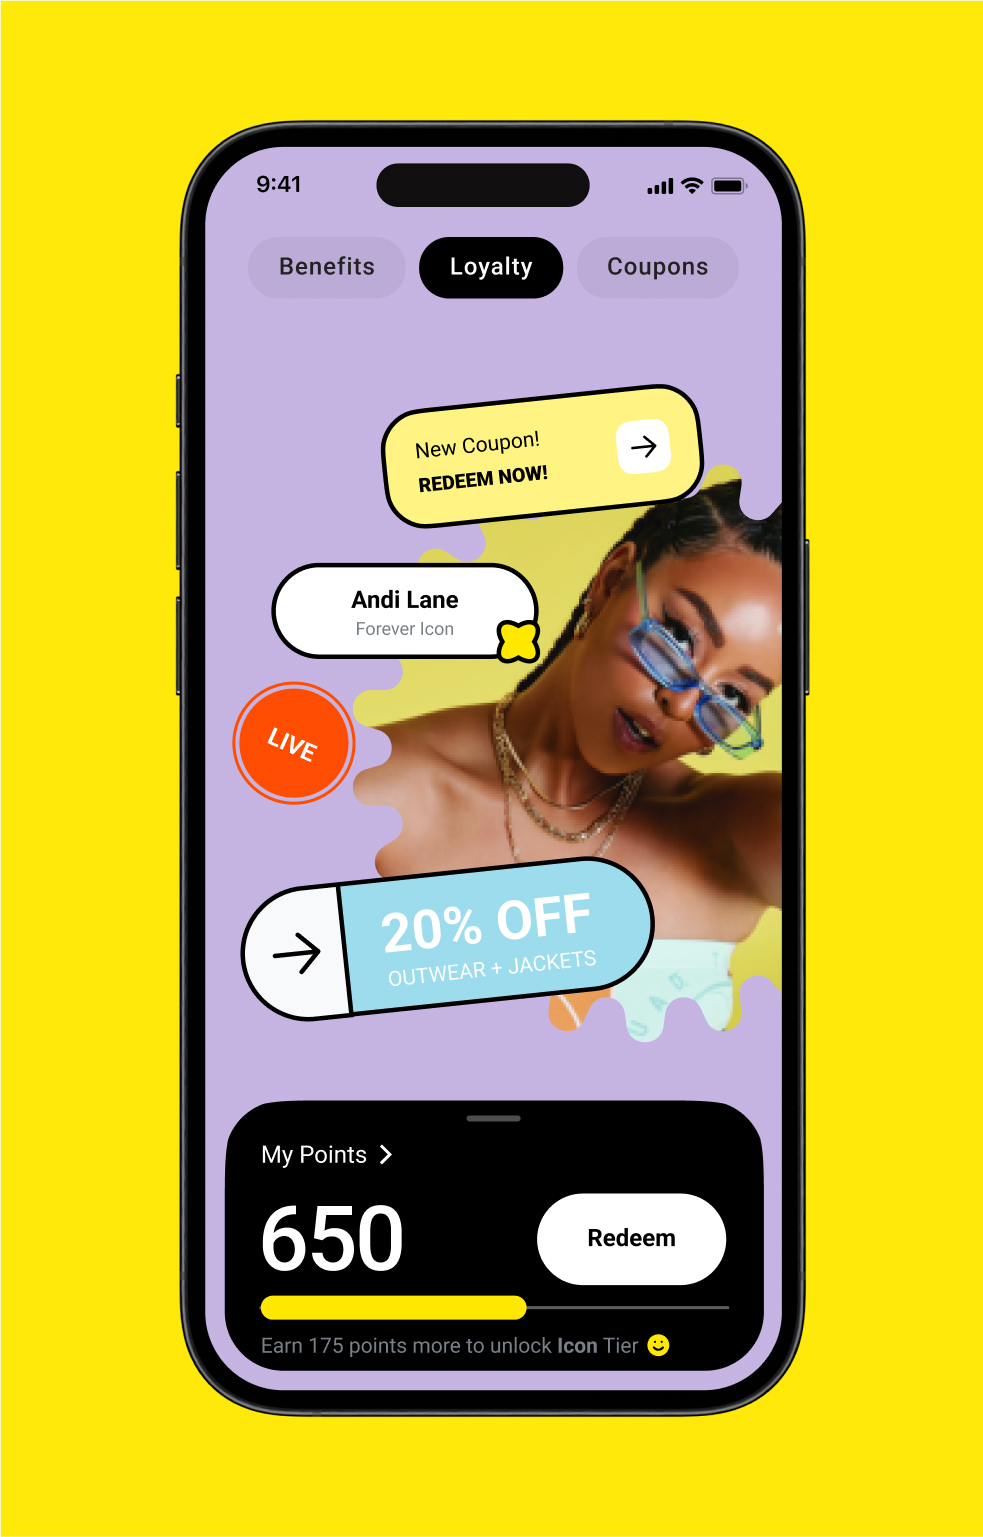 F21 Retail App Loyalty Program For Iphone And Android